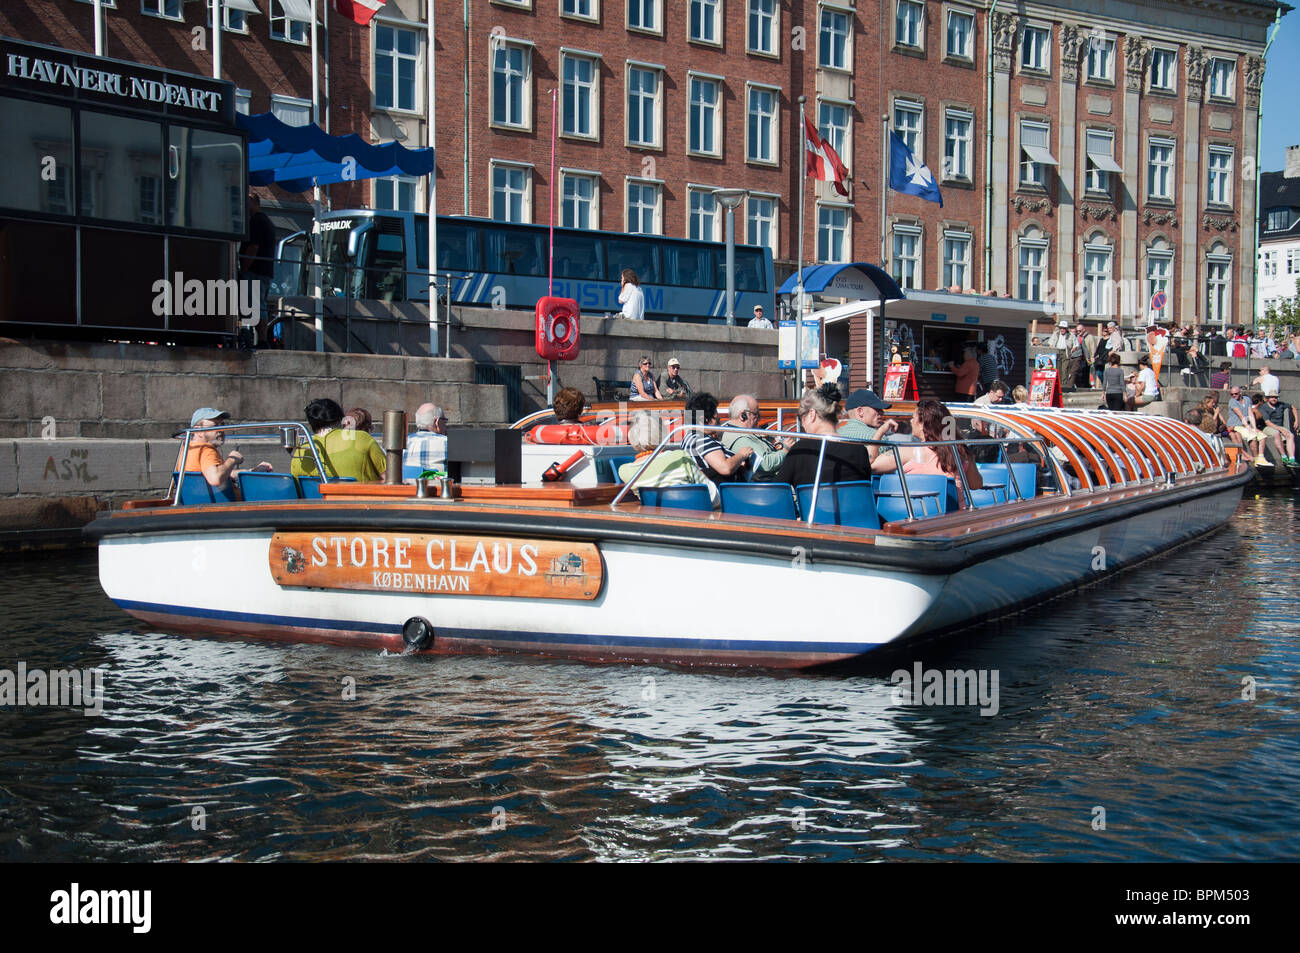 A view of the buildings and a canal cruise boat on the Nyhavn canal in Copenhagen, Denmark. Stock Photo